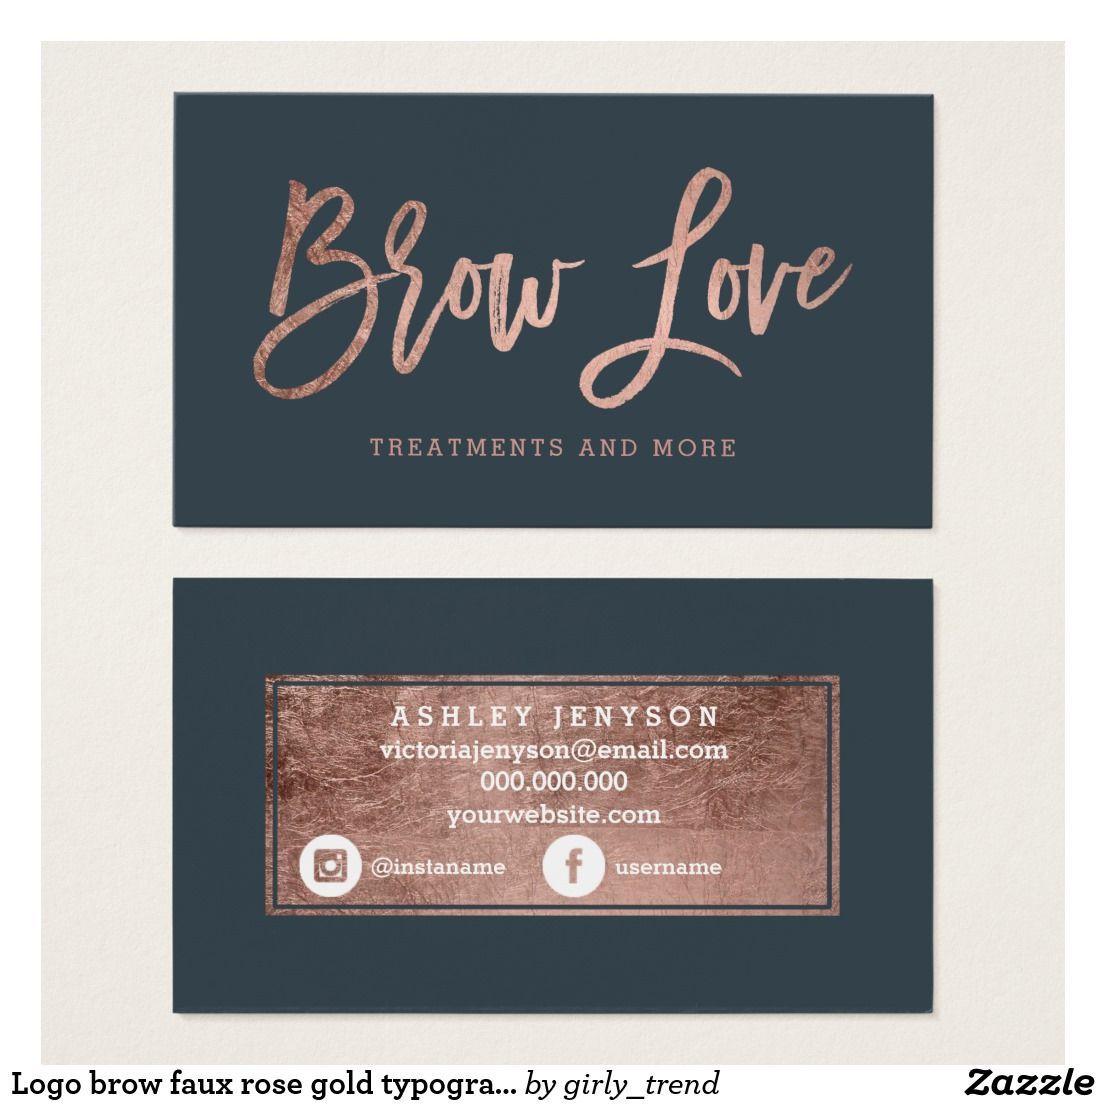 Charcoal and Gold Logo - Logo brow faux rose gold typography grey charcoal business card ...